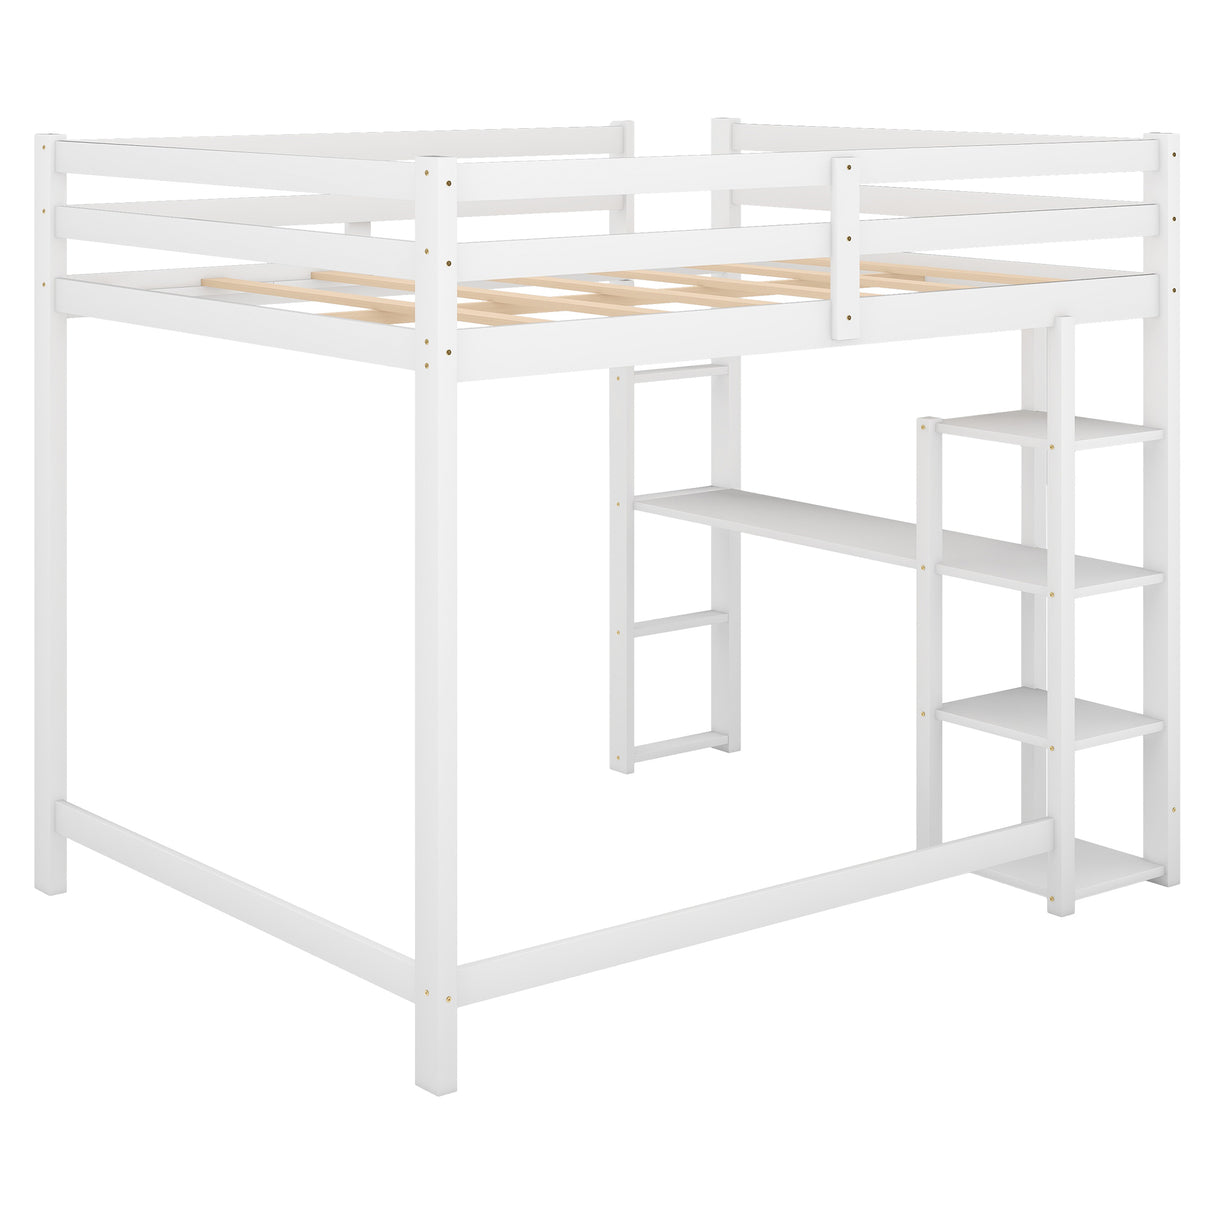 Full Size Loft Bed with Built-in Desk and Shelves,White - Home Elegance USA